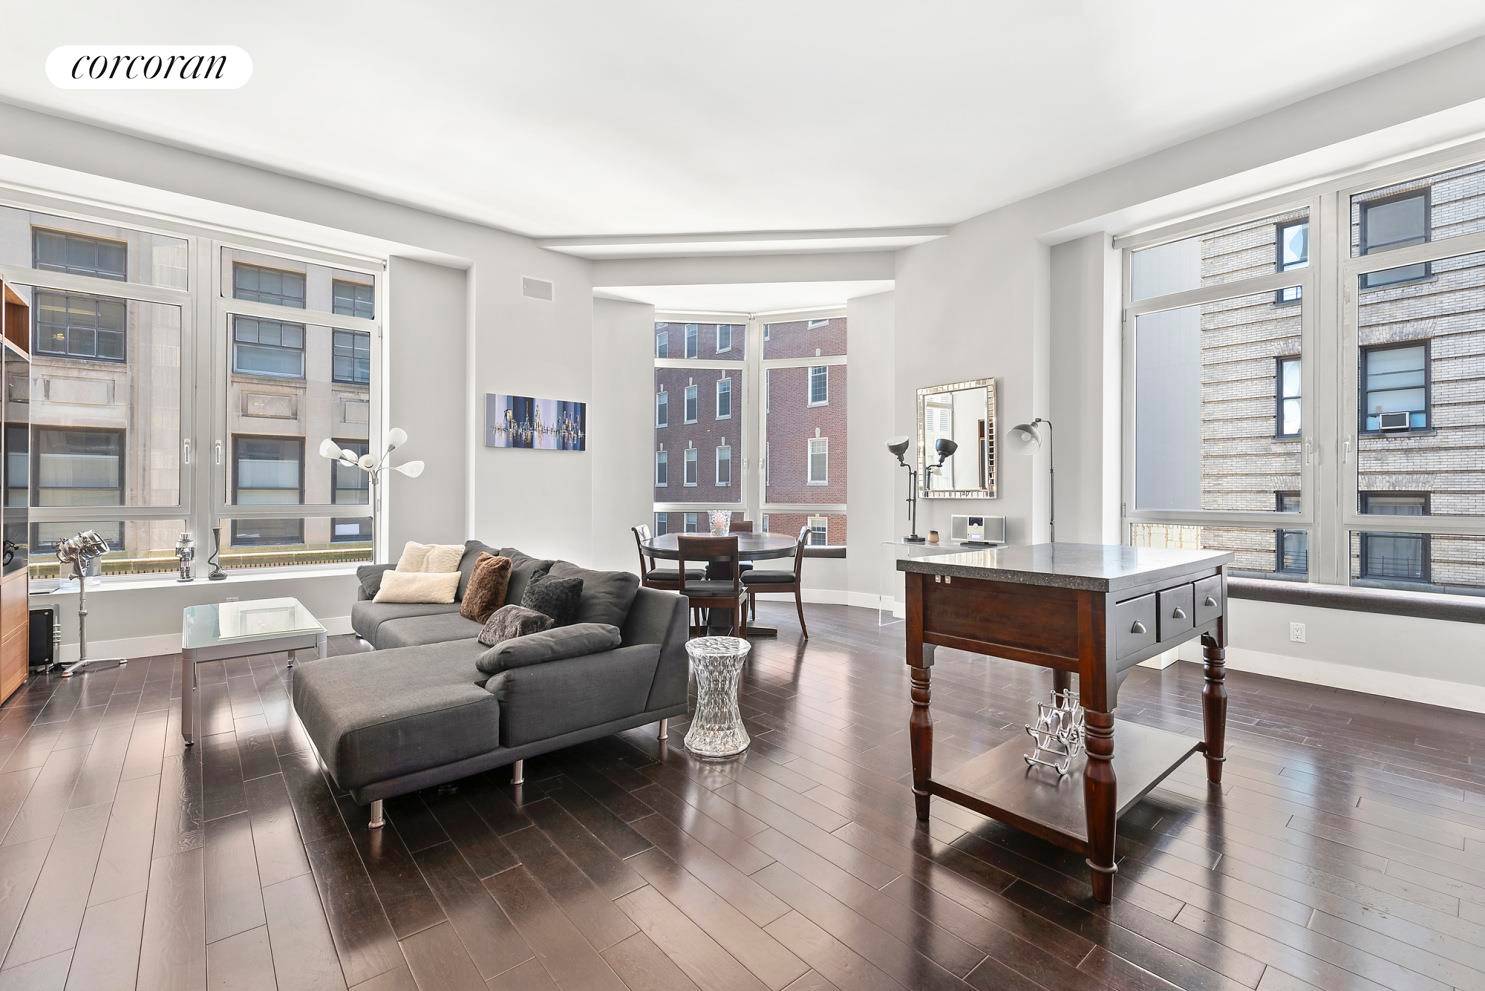 111 Fulton Street, Apt. 514 two bedrooms, 2 bathrooms modern and lofty home with 1, 312 SF of interior space, and located in a luxury condominium defined with curated amenities.